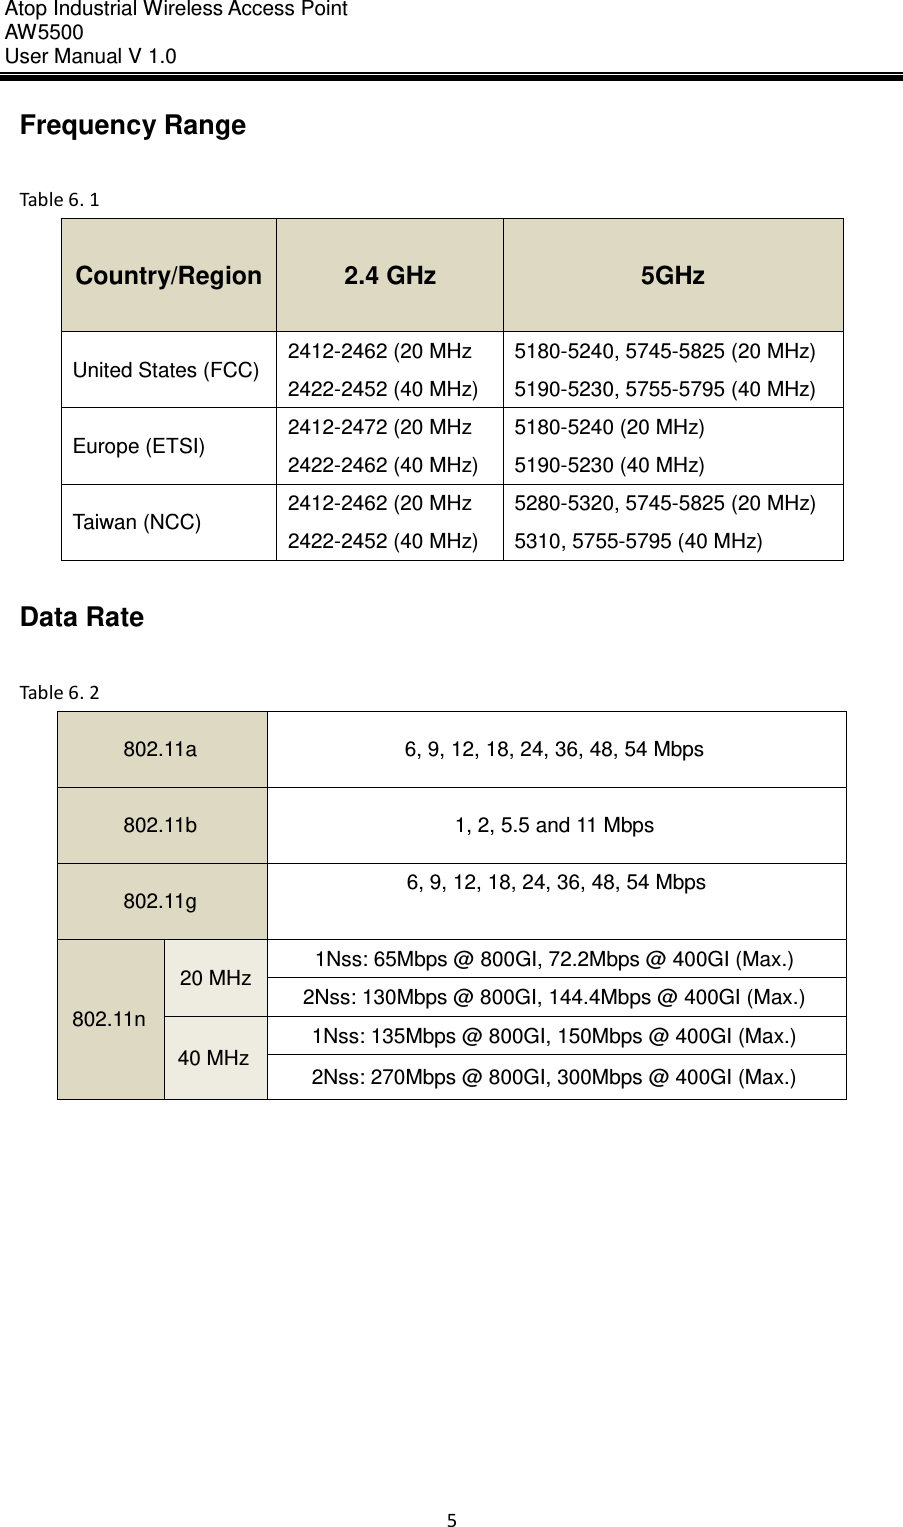 Atop Industrial Wireless Access Point AW 5500 User Manual V 1.0                      5  Frequency Range  Table 6. 1 Country/Region 2.4 GHz 5GHz United States (FCC) 2412-2462 (20 MHz 2422-2452 (40 MHz) 5180-5240, 5745-5825 (20 MHz) 5190-5230, 5755-5795 (40 MHz) Europe (ETSI) 2412-2472 (20 MHz 2422-2462 (40 MHz) 5180-5240 (20 MHz) 5190-5230 (40 MHz) Taiwan (NCC) 2412-2462 (20 MHz 2422-2452 (40 MHz) 5280-5320, 5745-5825 (20 MHz) 5310, 5755-5795 (40 MHz)  Data Rate  Table 6. 2 802.11a 6, 9, 12, 18, 24, 36, 48, 54 Mbps 802.11b 1, 2, 5.5 and 11 Mbps 802.11g 6, 9, 12, 18, 24, 36, 48, 54 Mbps  802.11n 20 MHz 1Nss: 65Mbps @ 800GI, 72.2Mbps @ 400GI (Max.) 2Nss: 130Mbps @ 800GI, 144.4Mbps @ 400GI (Max.) 40 MHz 1Nss: 135Mbps @ 800GI, 150Mbps @ 400GI (Max.) 2Nss: 270Mbps @ 800GI, 300Mbps @ 400GI (Max.)     